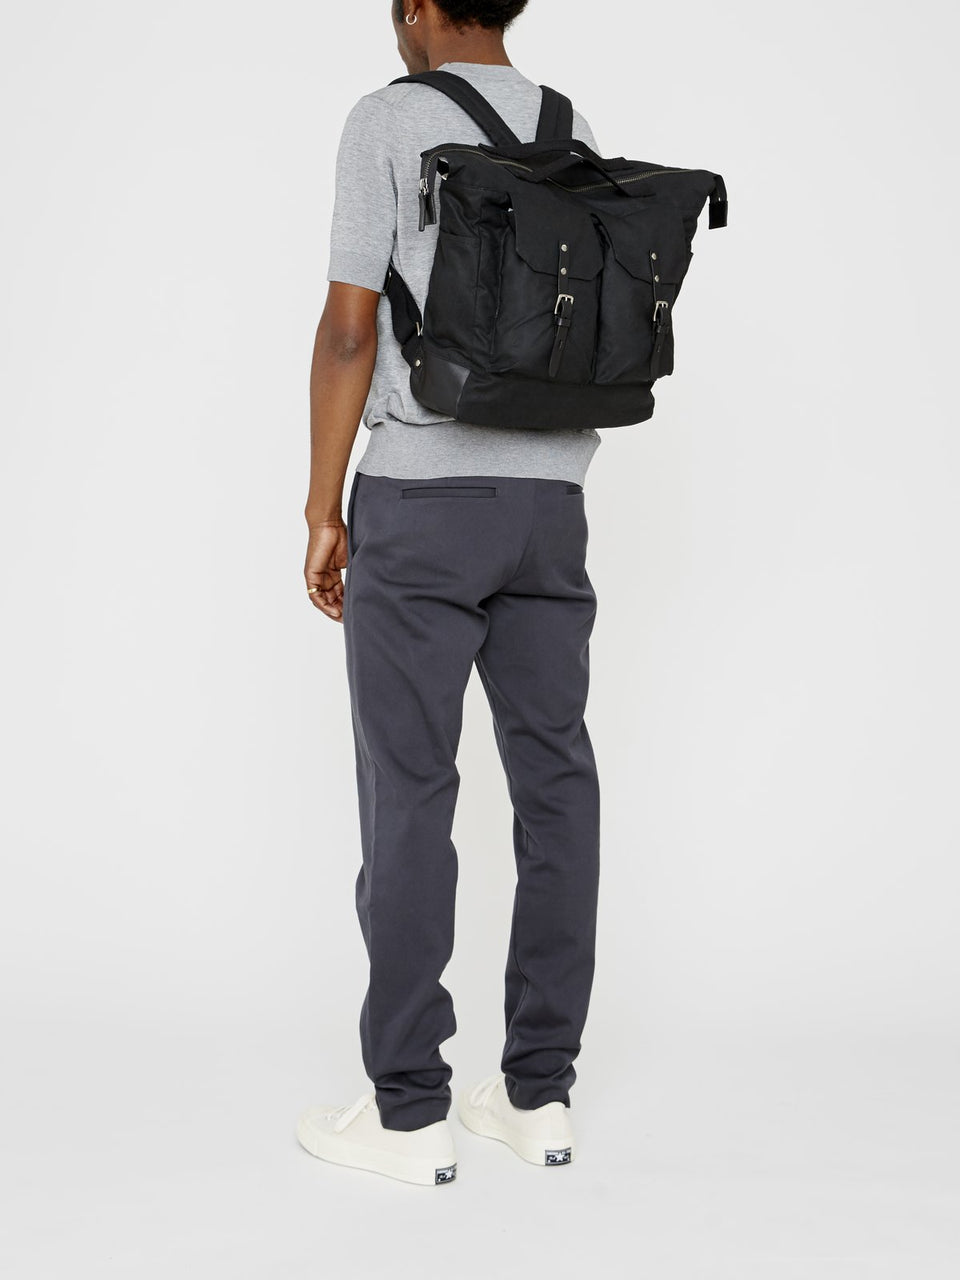 Frank Large Waxed Cotton Rucksack in Brick